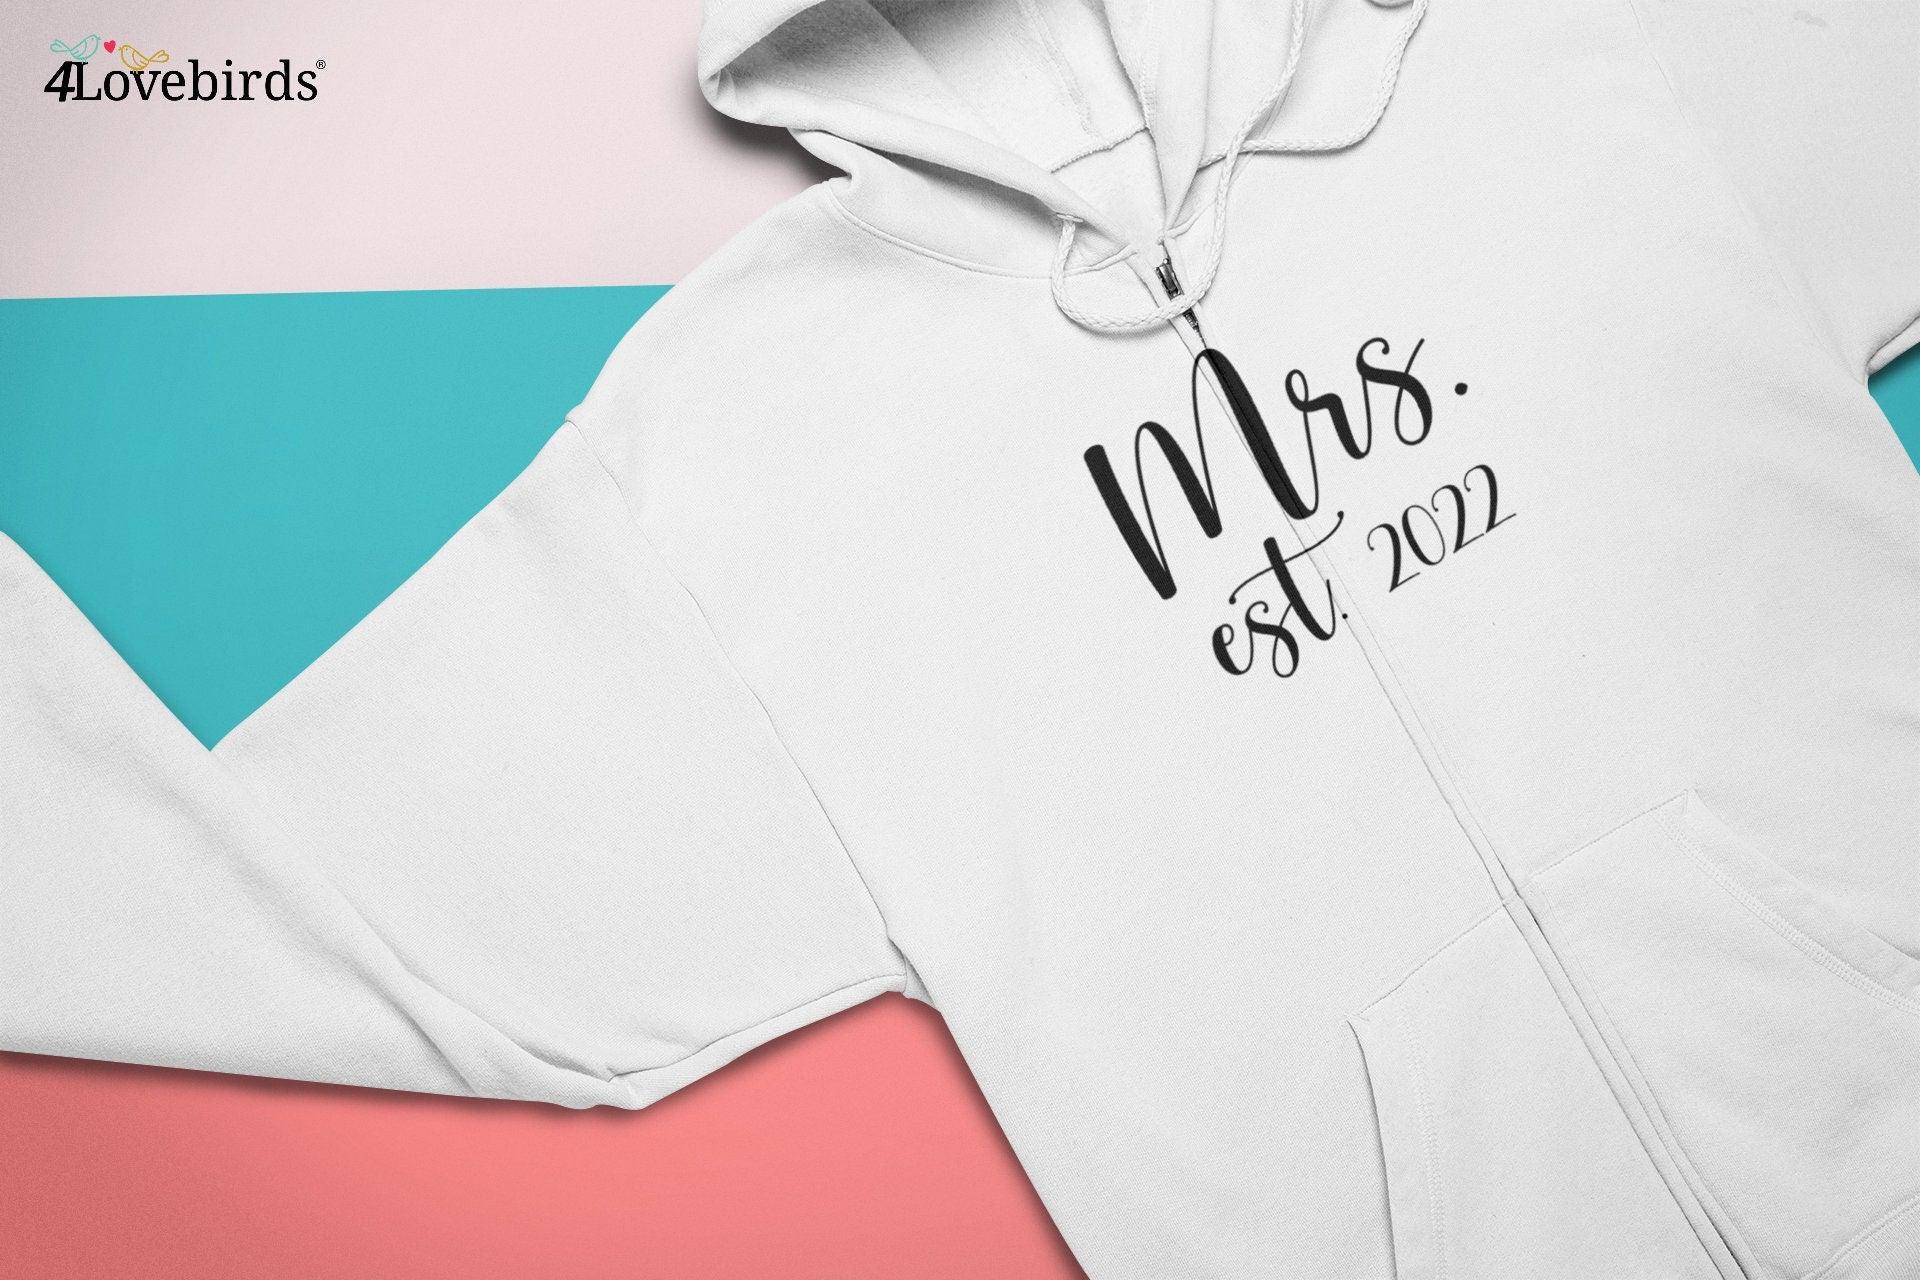 Mr and Mrs est. 2022 Hoodie, Lovers matching T-shirt, Gift for Couple, Married Sweatshirt,, Husband and Wife Longsleeve, Plain model - 4Lovebirds